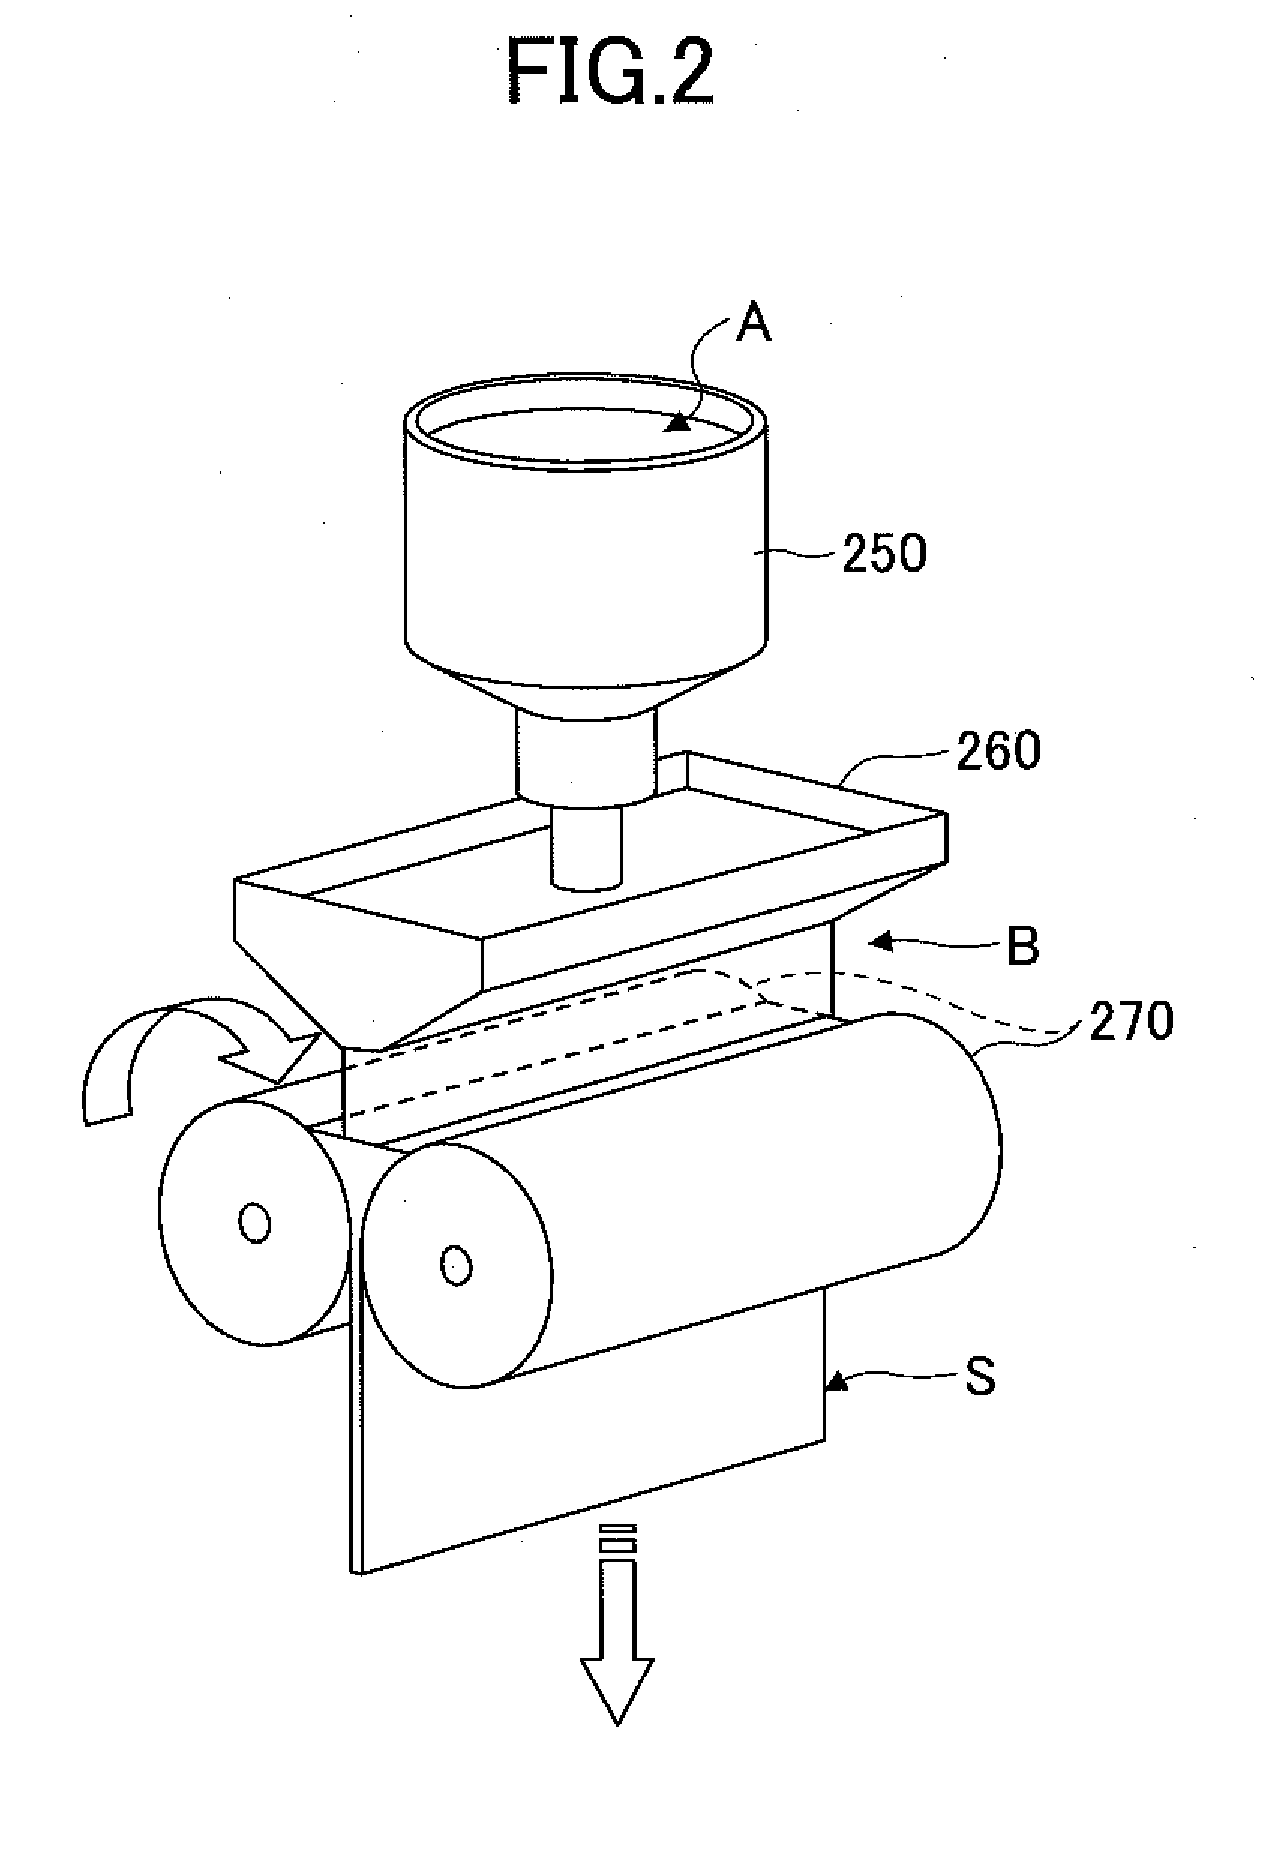 Substrate processing apparatus and susceptor